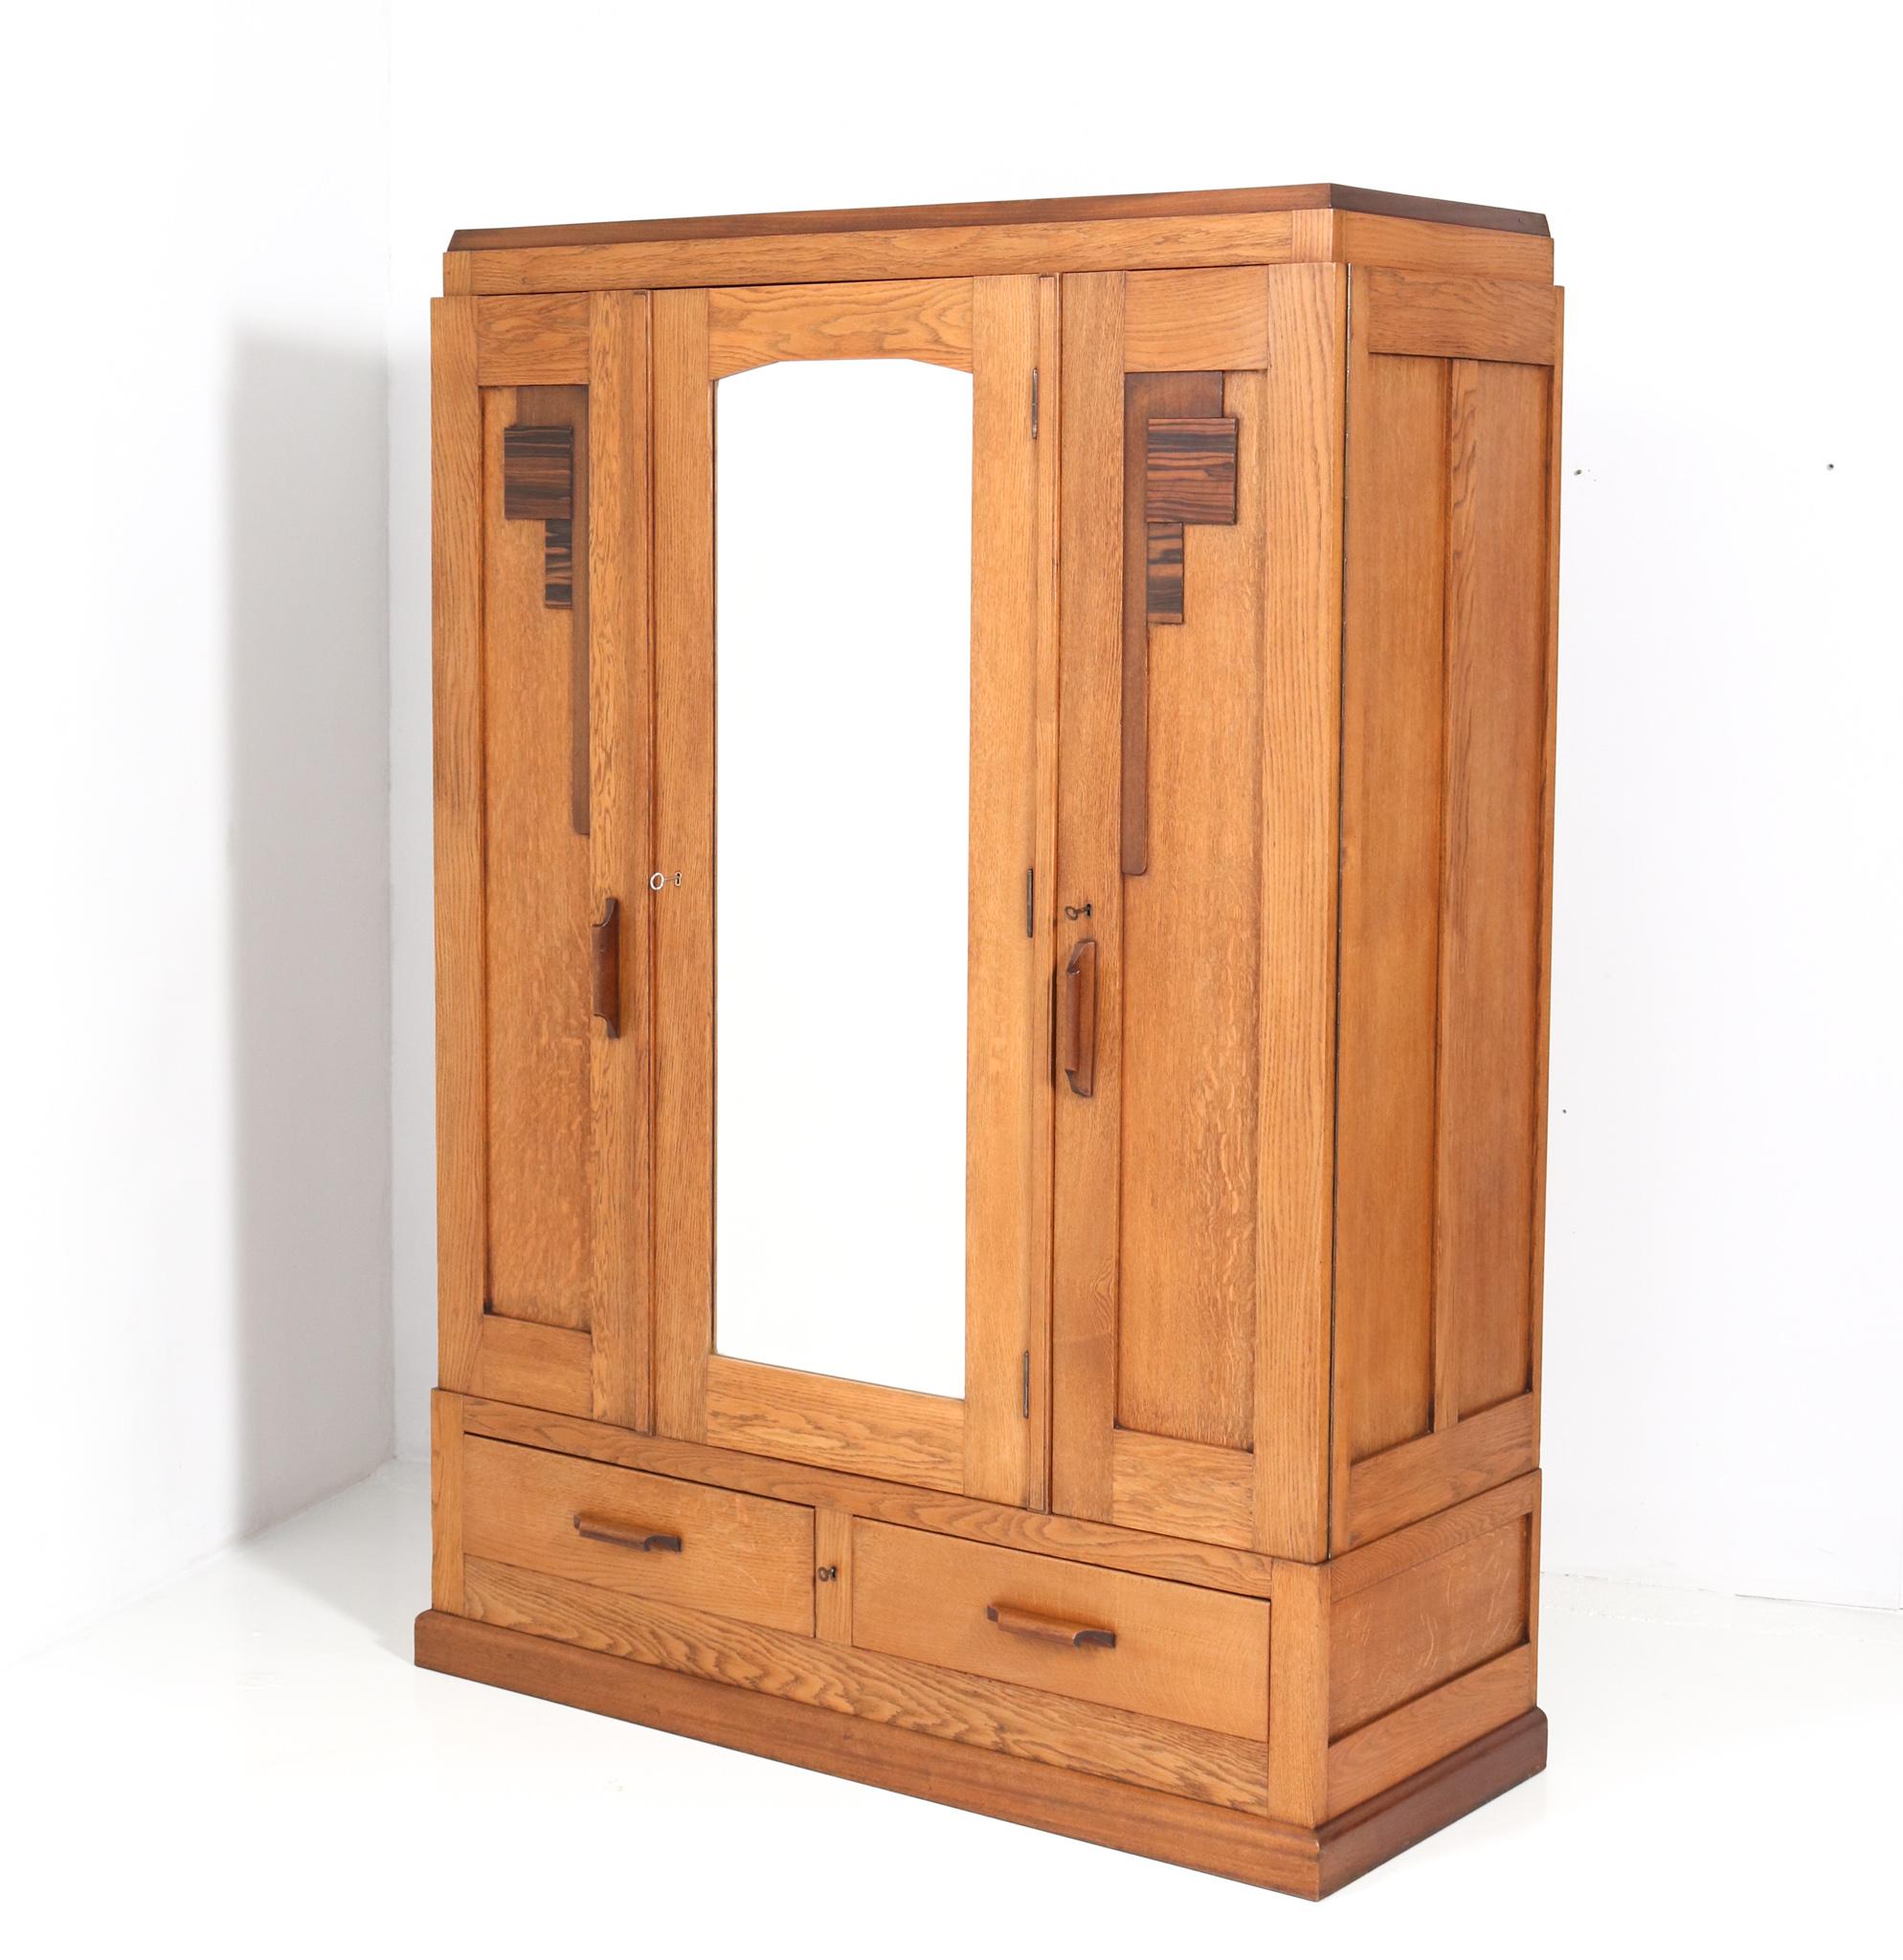 Stunning and rare Art Deco Amsterdamse School armoire or wardrobe.
Striking Dutch design from the 1920s.
Solid oak with original padouk handles and padouk and macassar lining.
The middle door has the original beveled glass mirror.
Three original